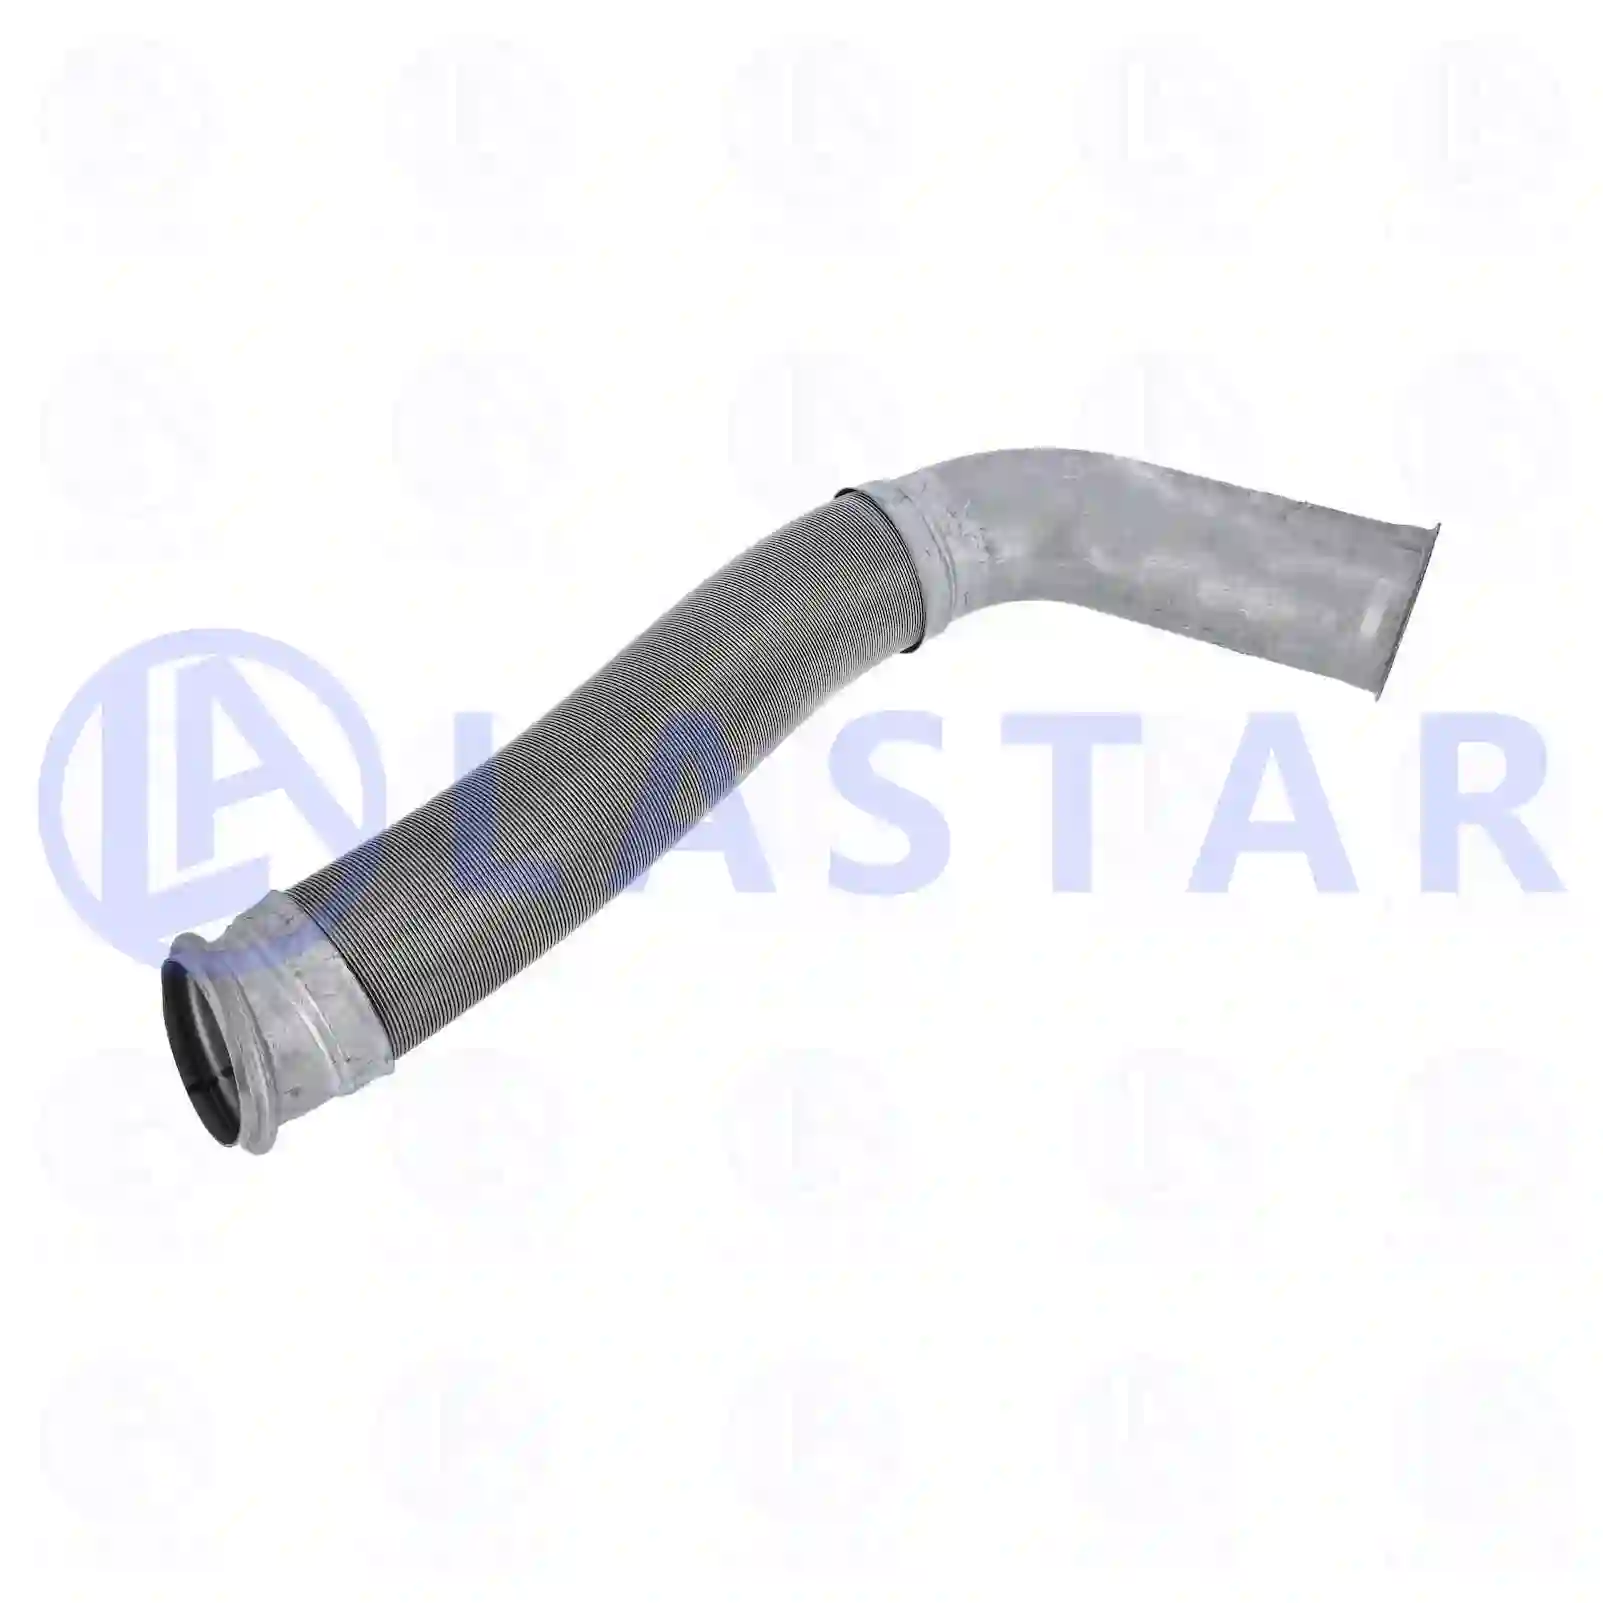 Front exhaust pipe, 77706480, 1344053, 1428367, 1629454, ZG10334-0008 ||  77706480 Lastar Spare Part | Truck Spare Parts, Auotomotive Spare Parts Front exhaust pipe, 77706480, 1344053, 1428367, 1629454, ZG10334-0008 ||  77706480 Lastar Spare Part | Truck Spare Parts, Auotomotive Spare Parts